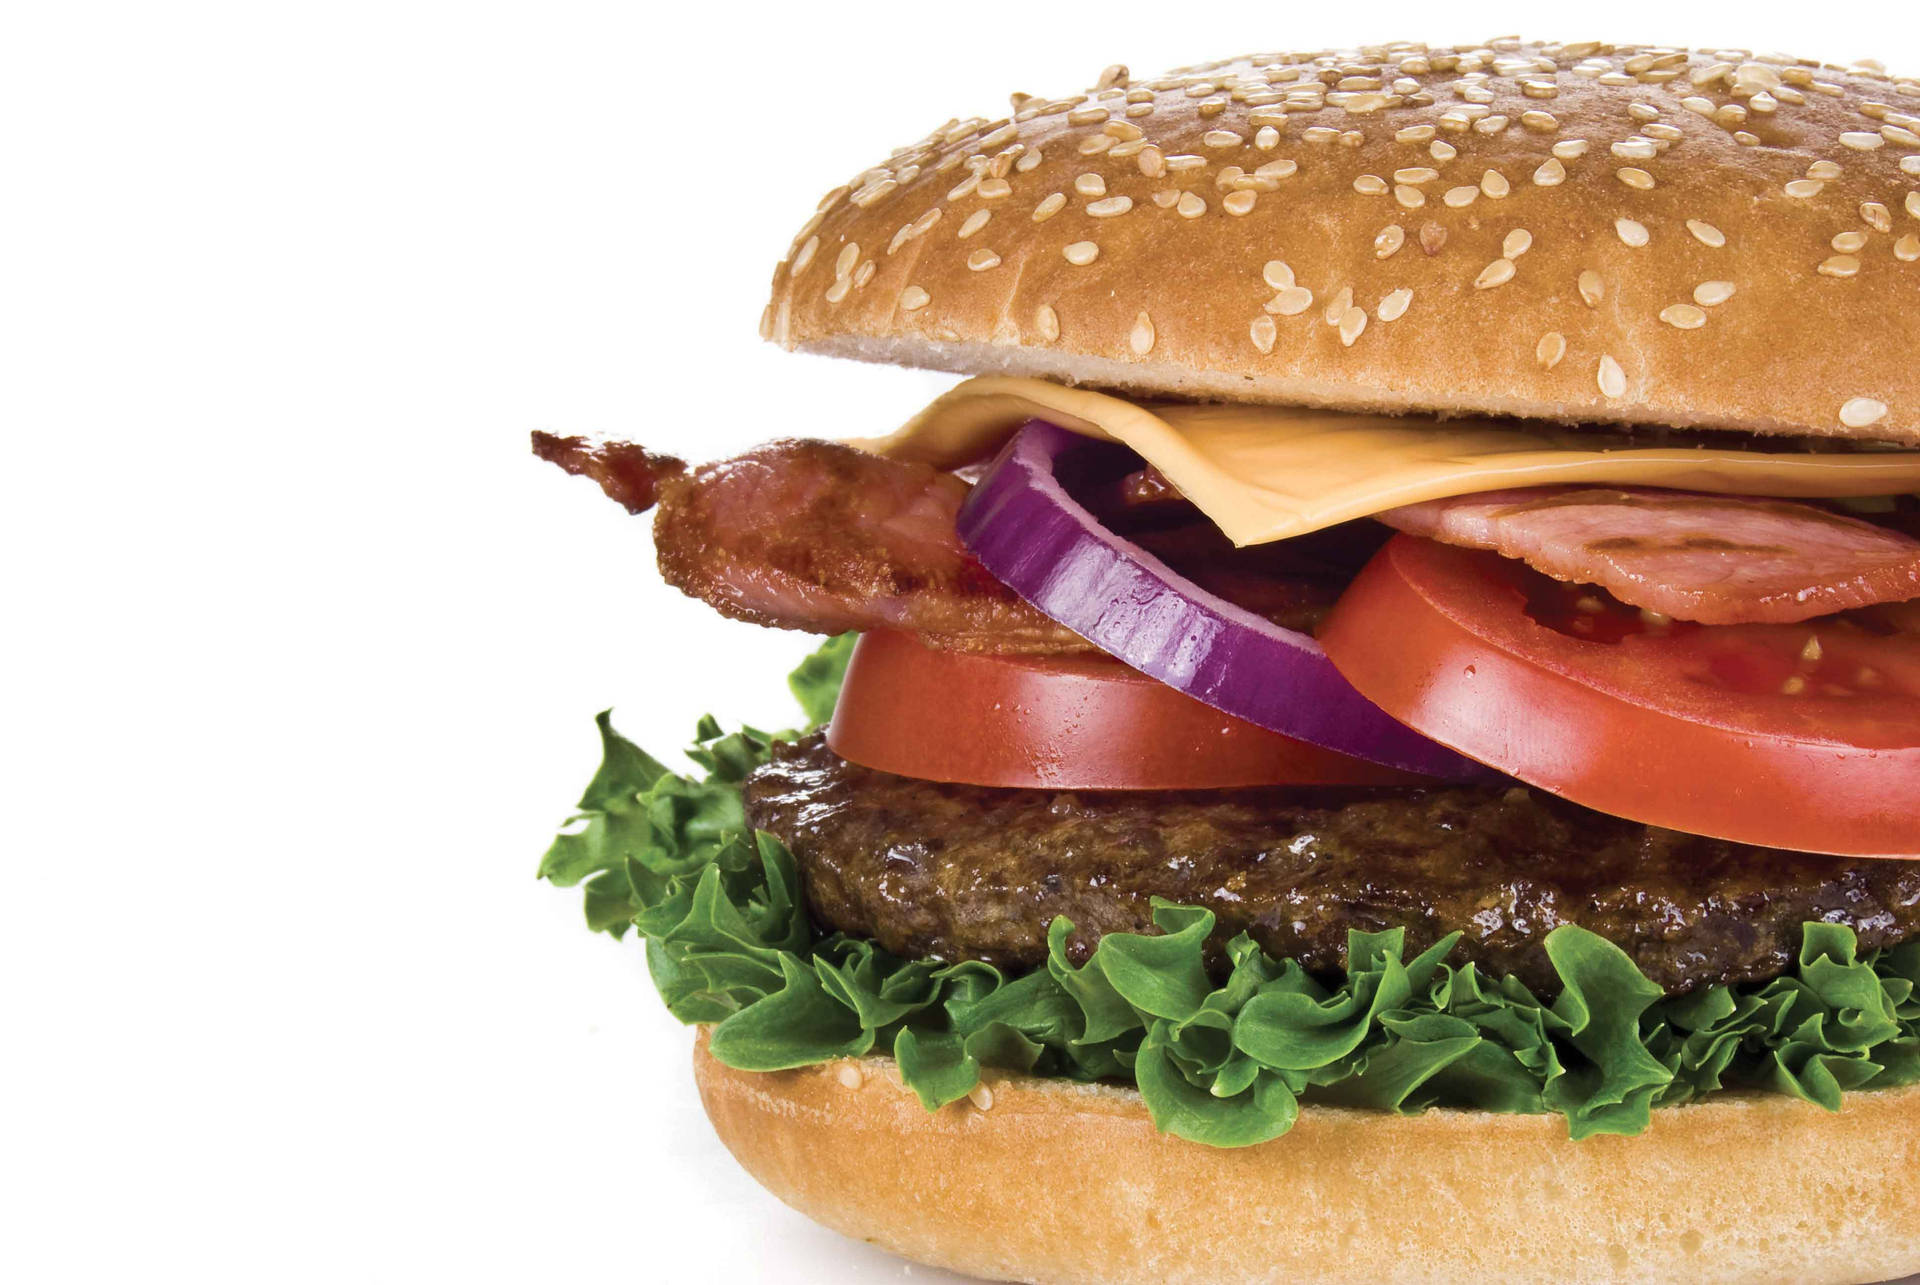 Burger King's Signature Whopper In High Resolution Wallpaper